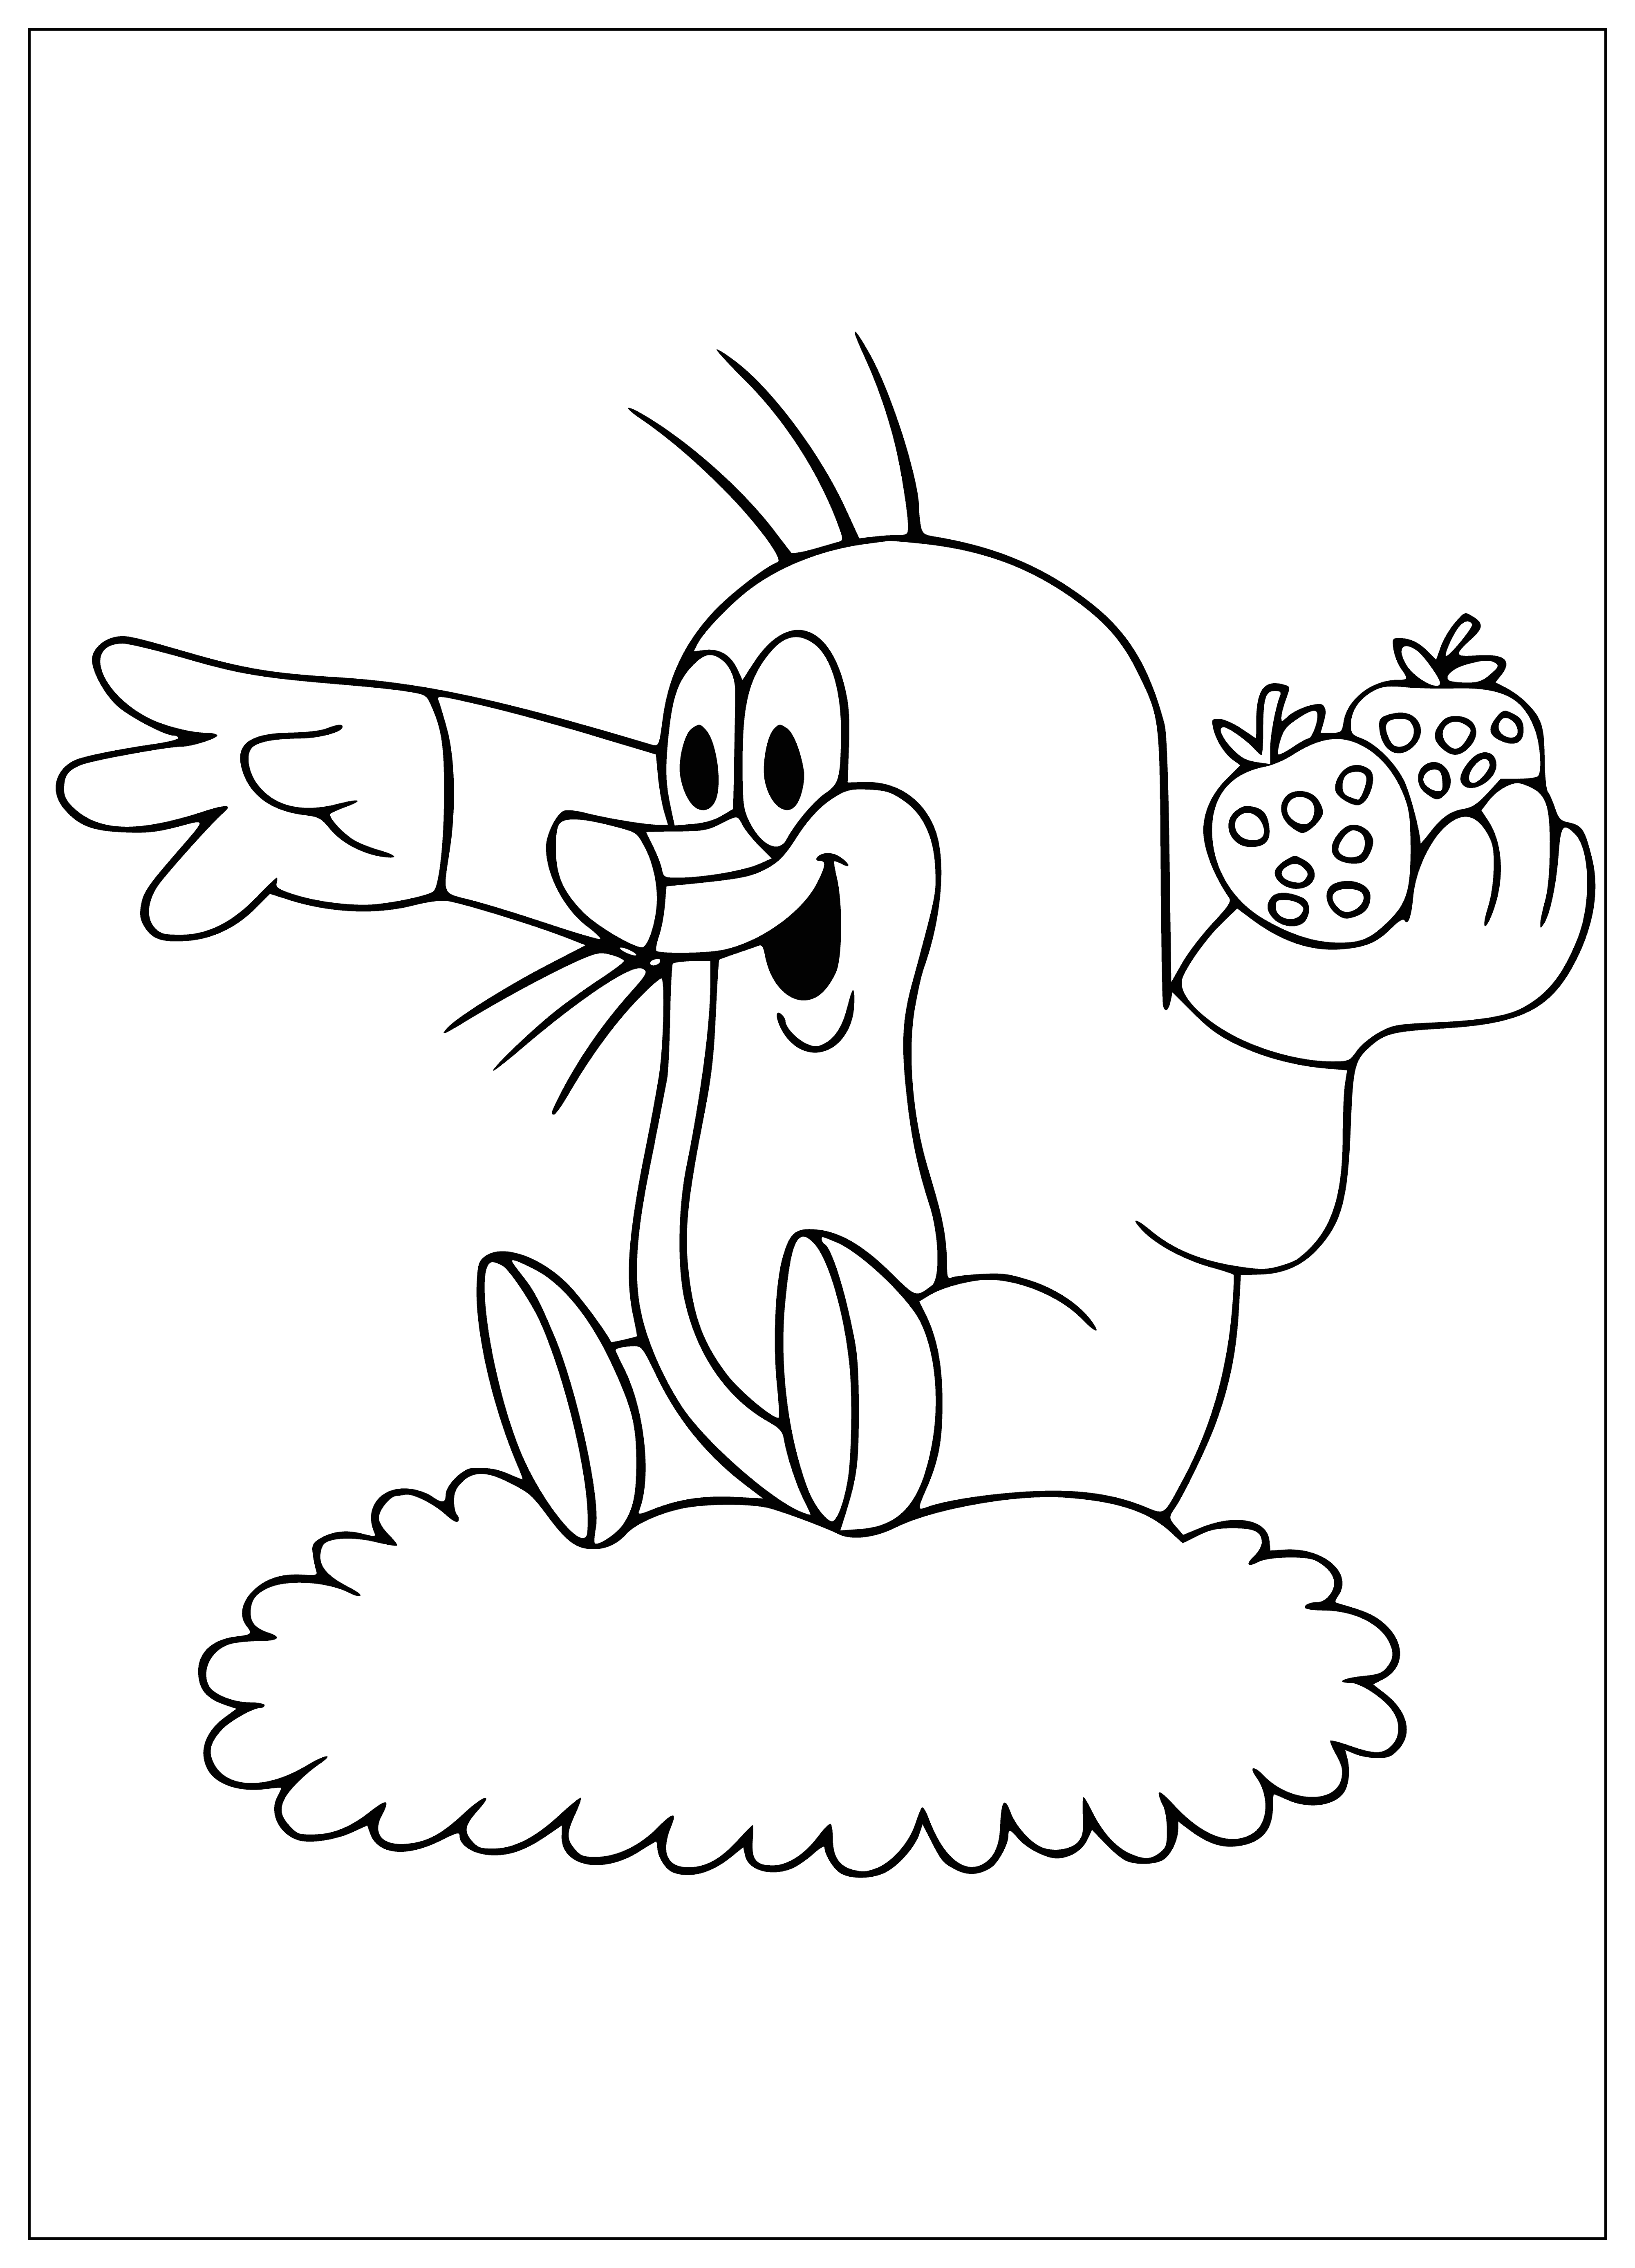 coloring page: Krtek - Mole is an adventurous, brown creature with a pink nose, black eyes, and a striped shirt. He carries a bag and is eager to explore!